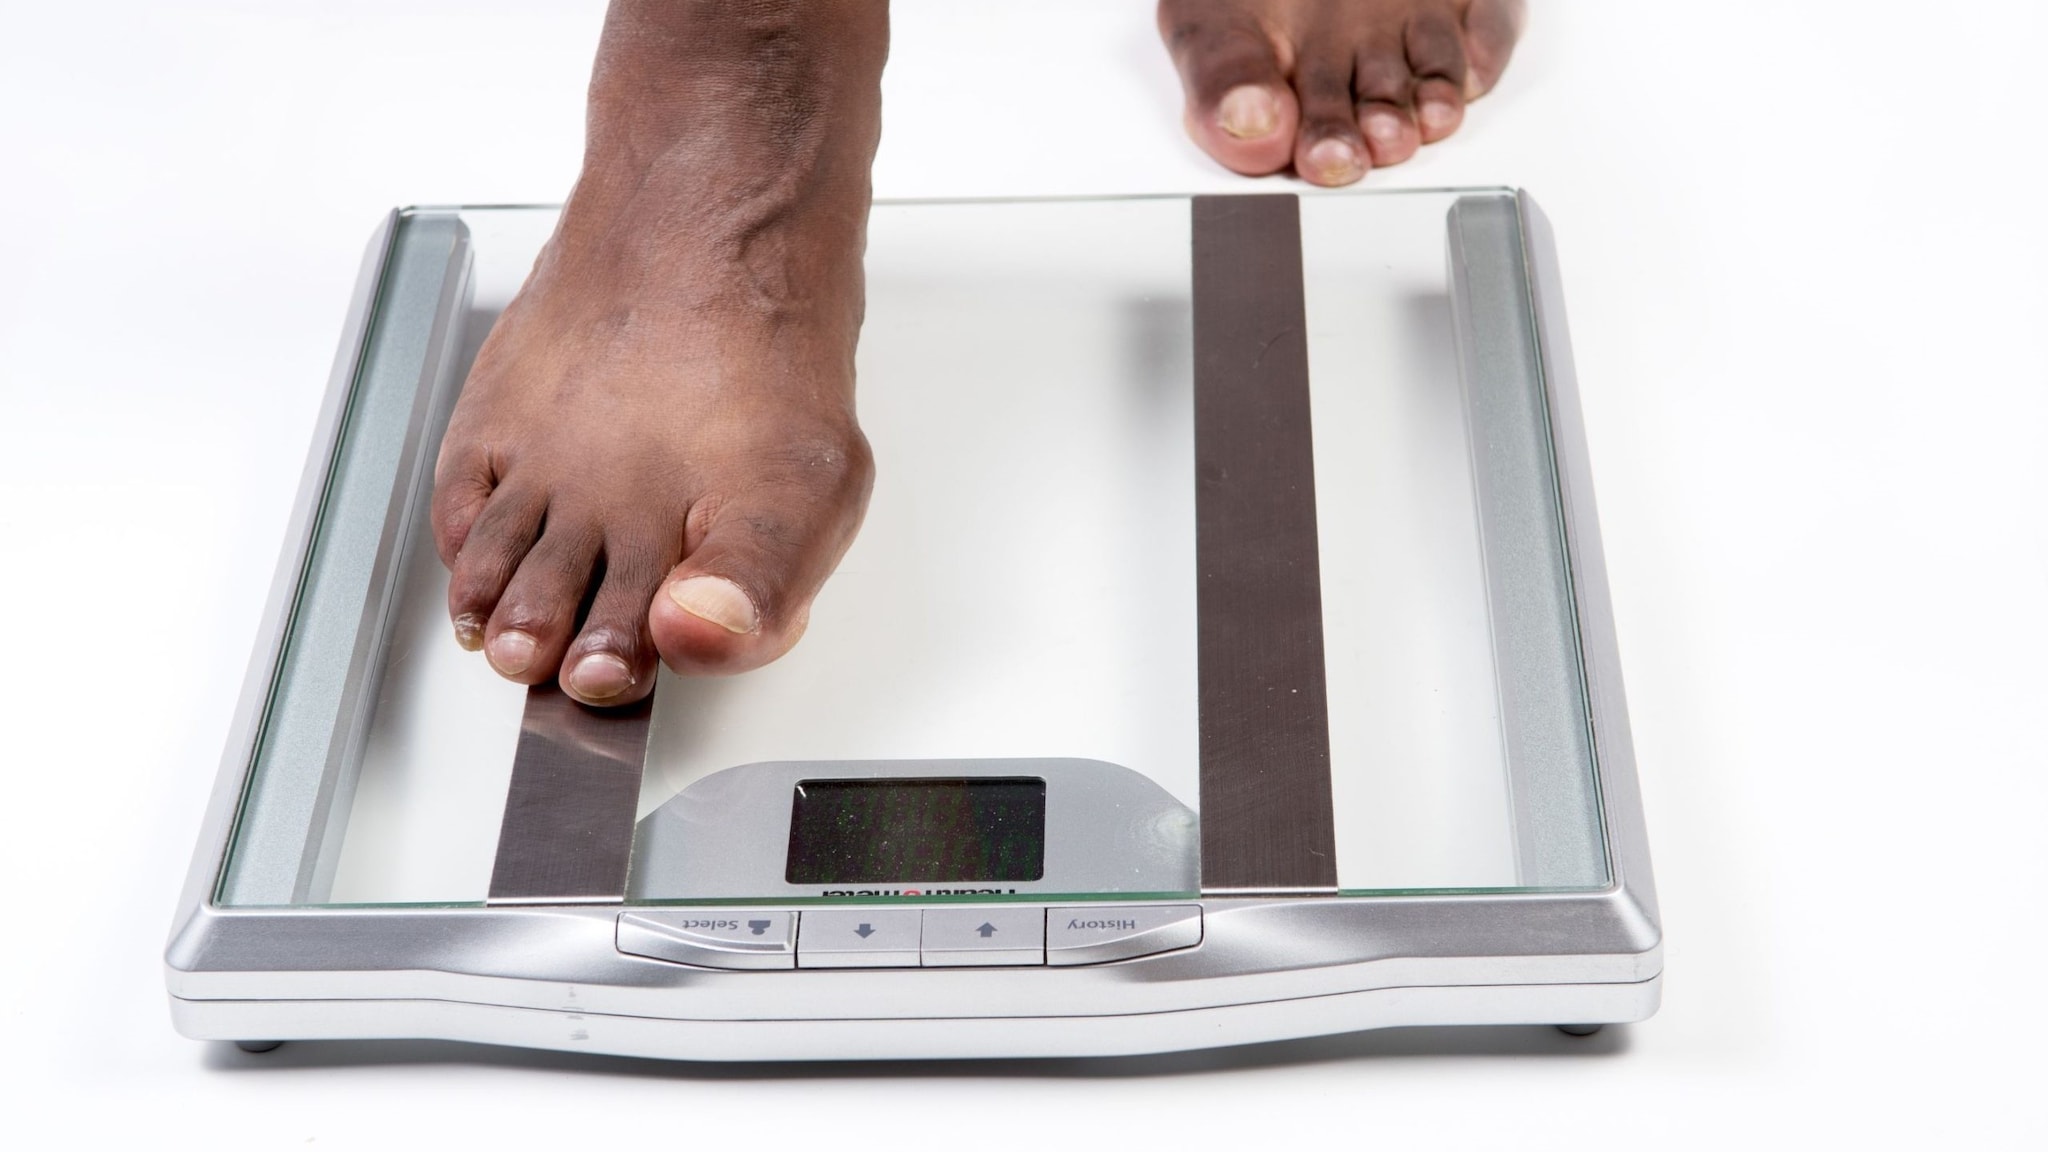 A person's feet stepping on electronic scales.